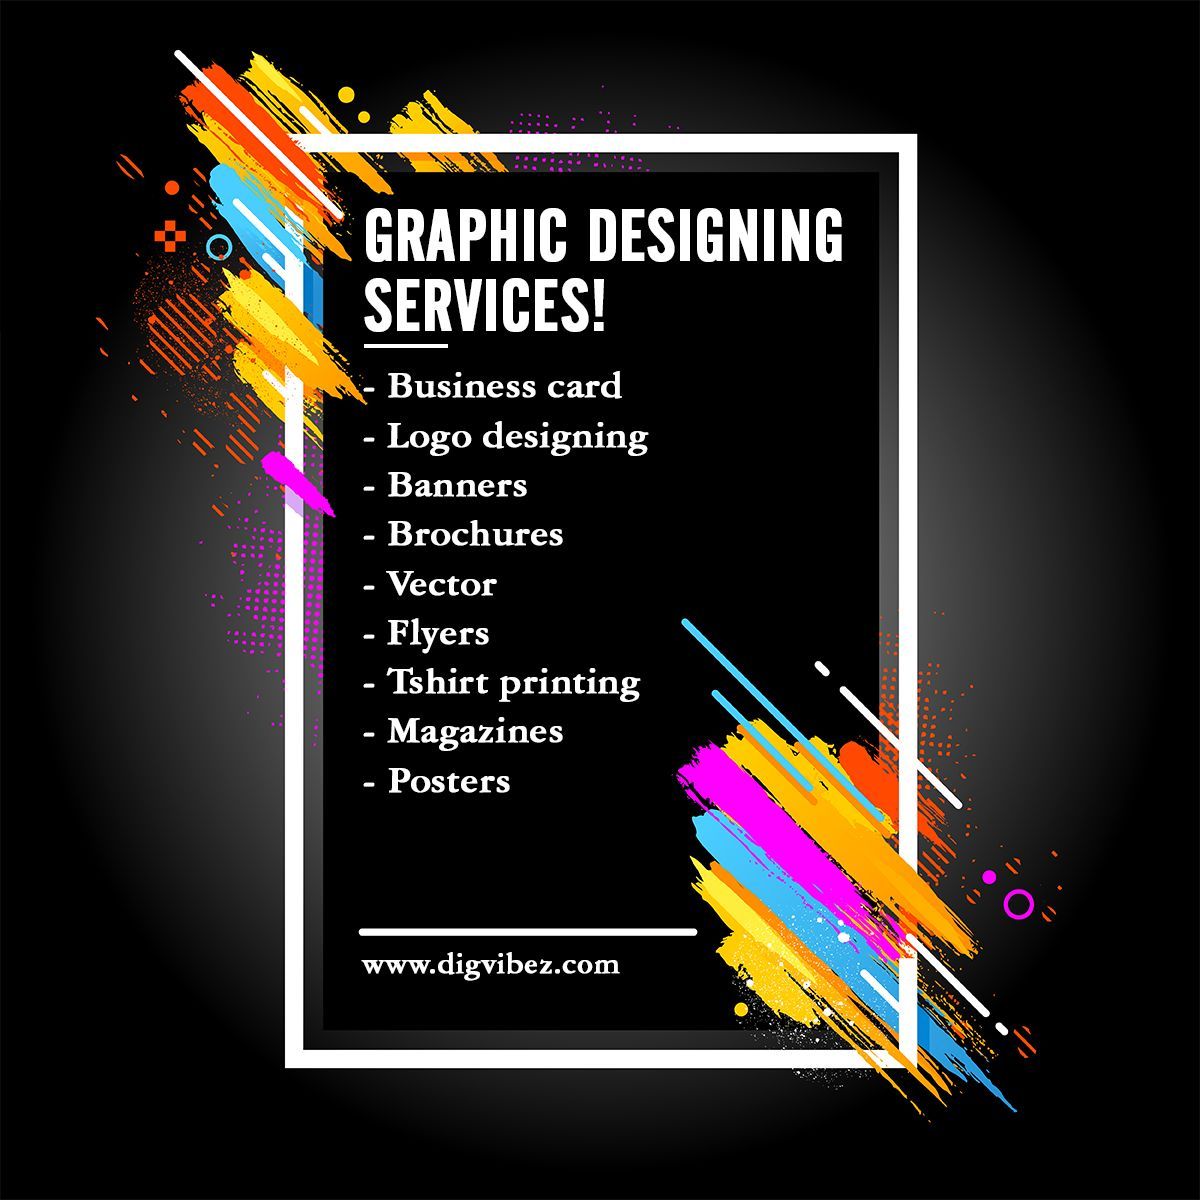 Category: Creative and Design Services